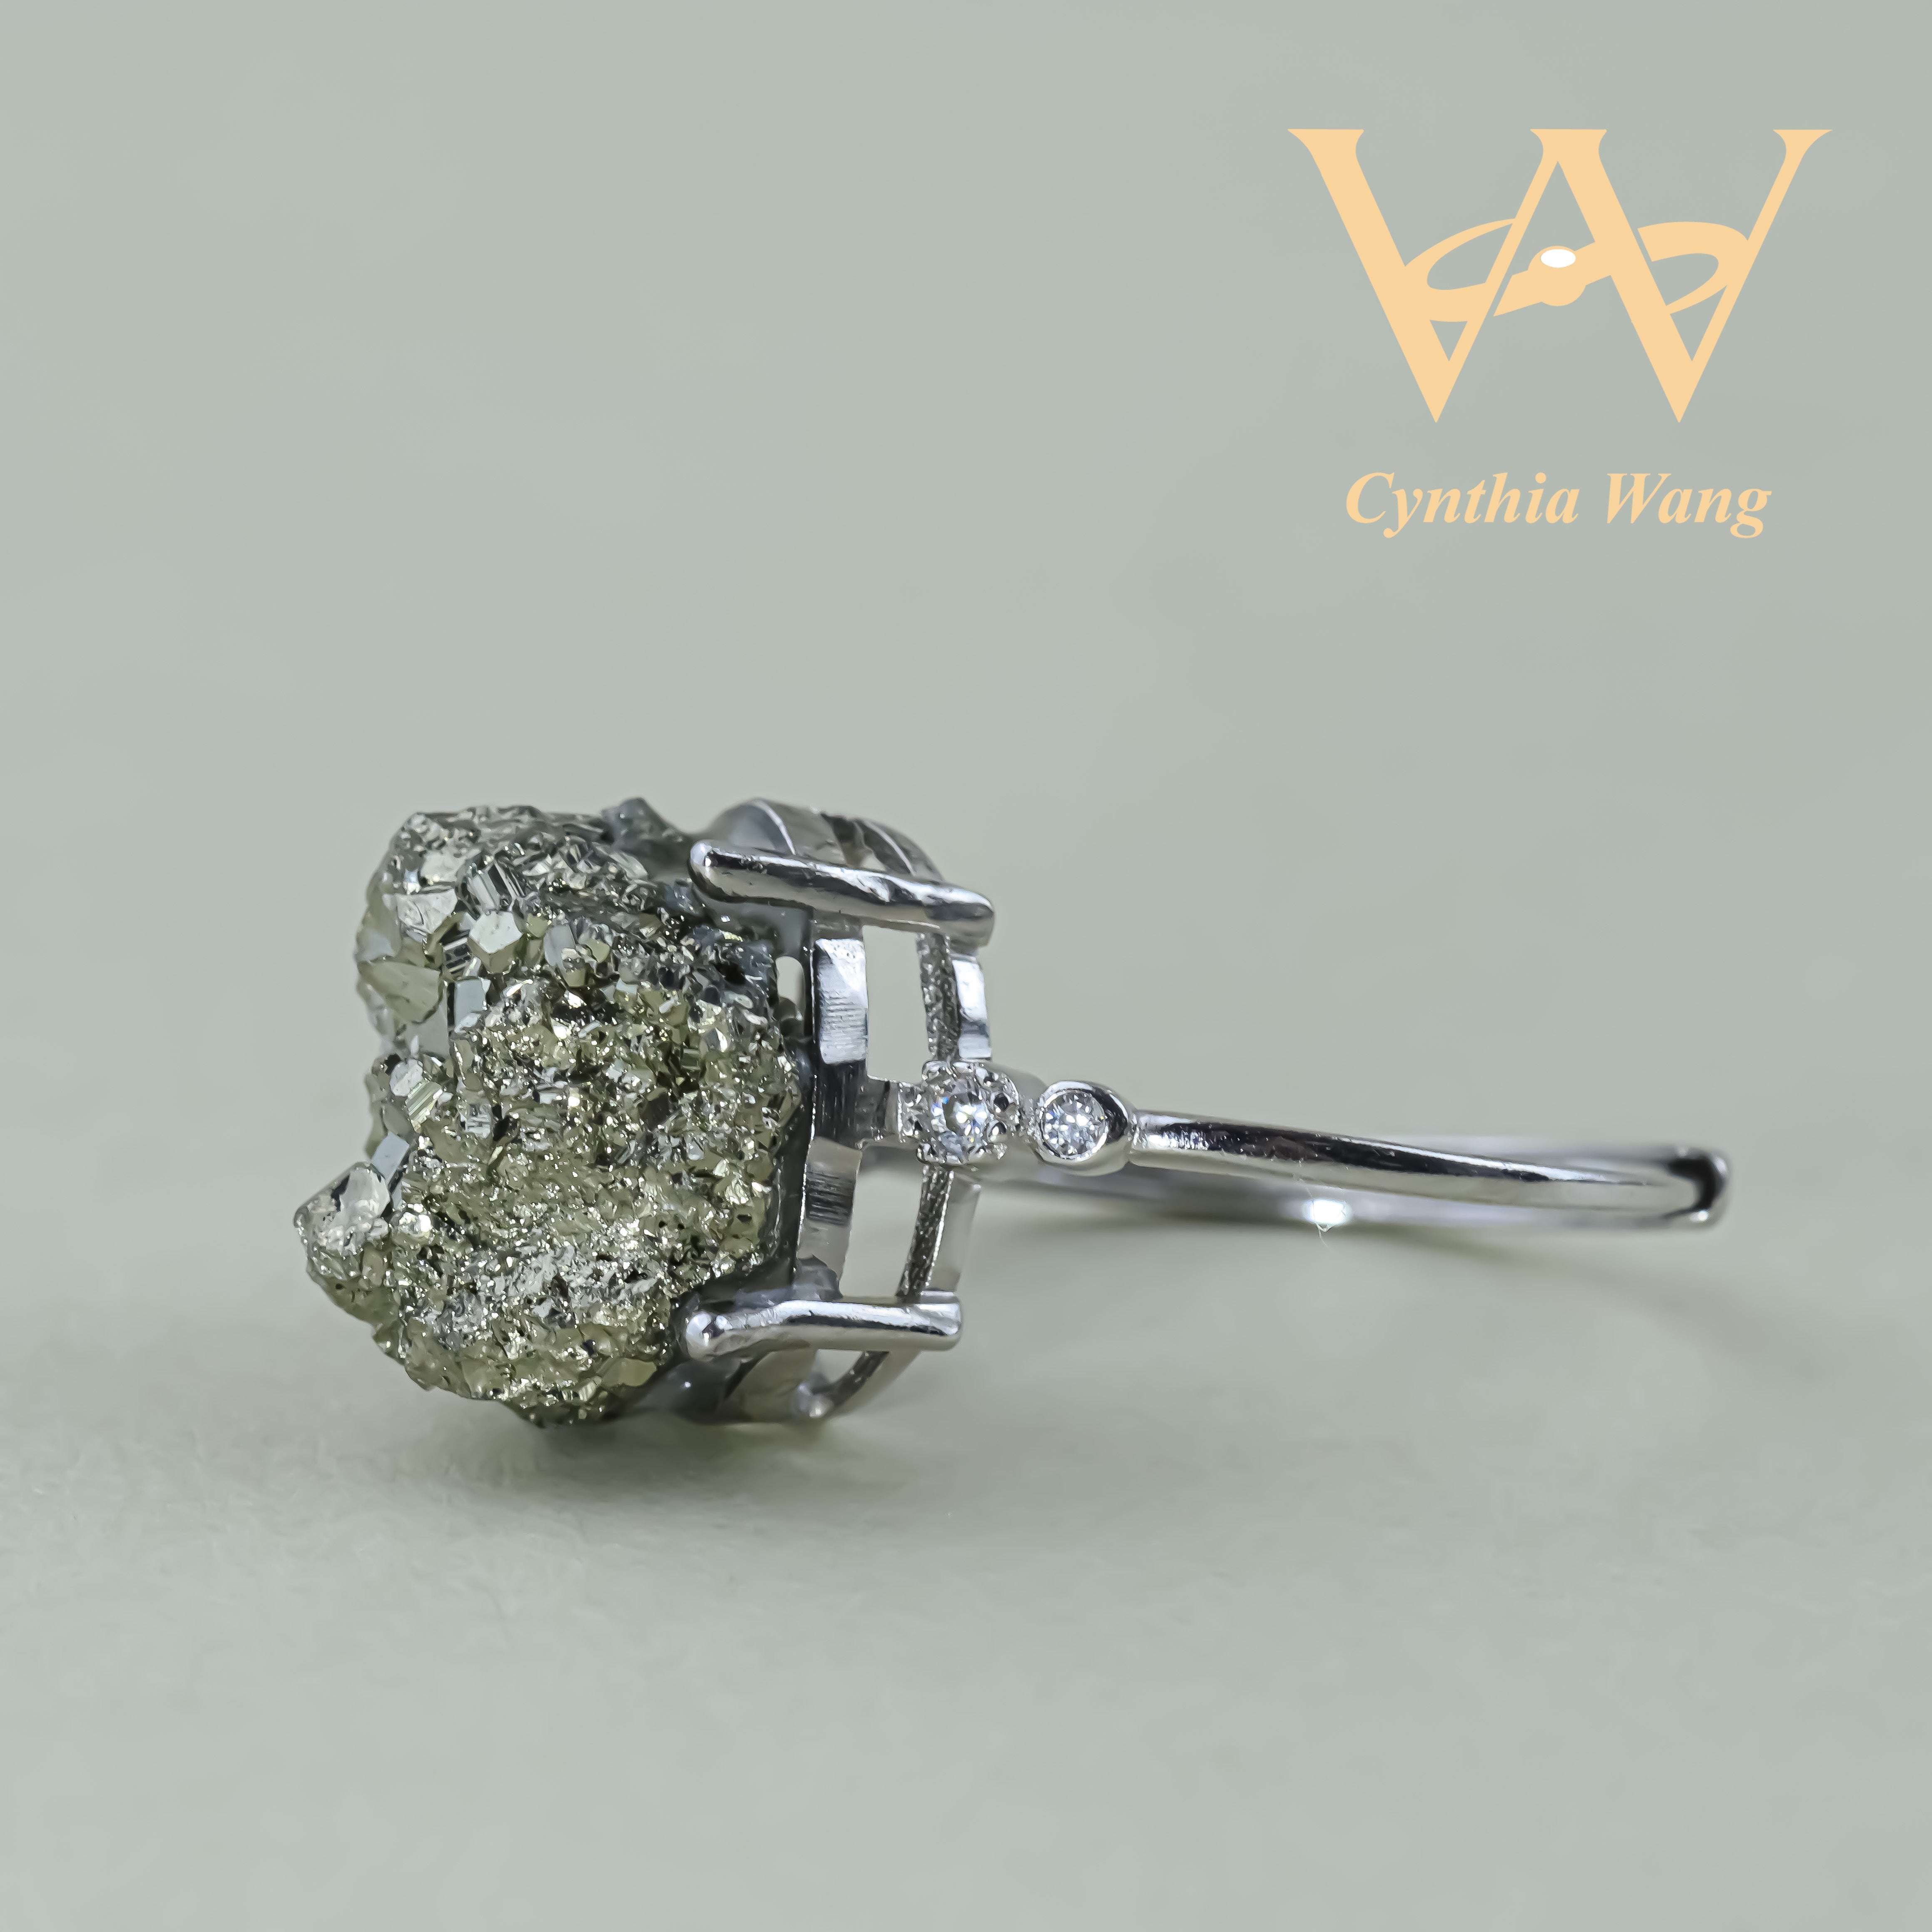 'Sparkling Haven' Pyrite Ring